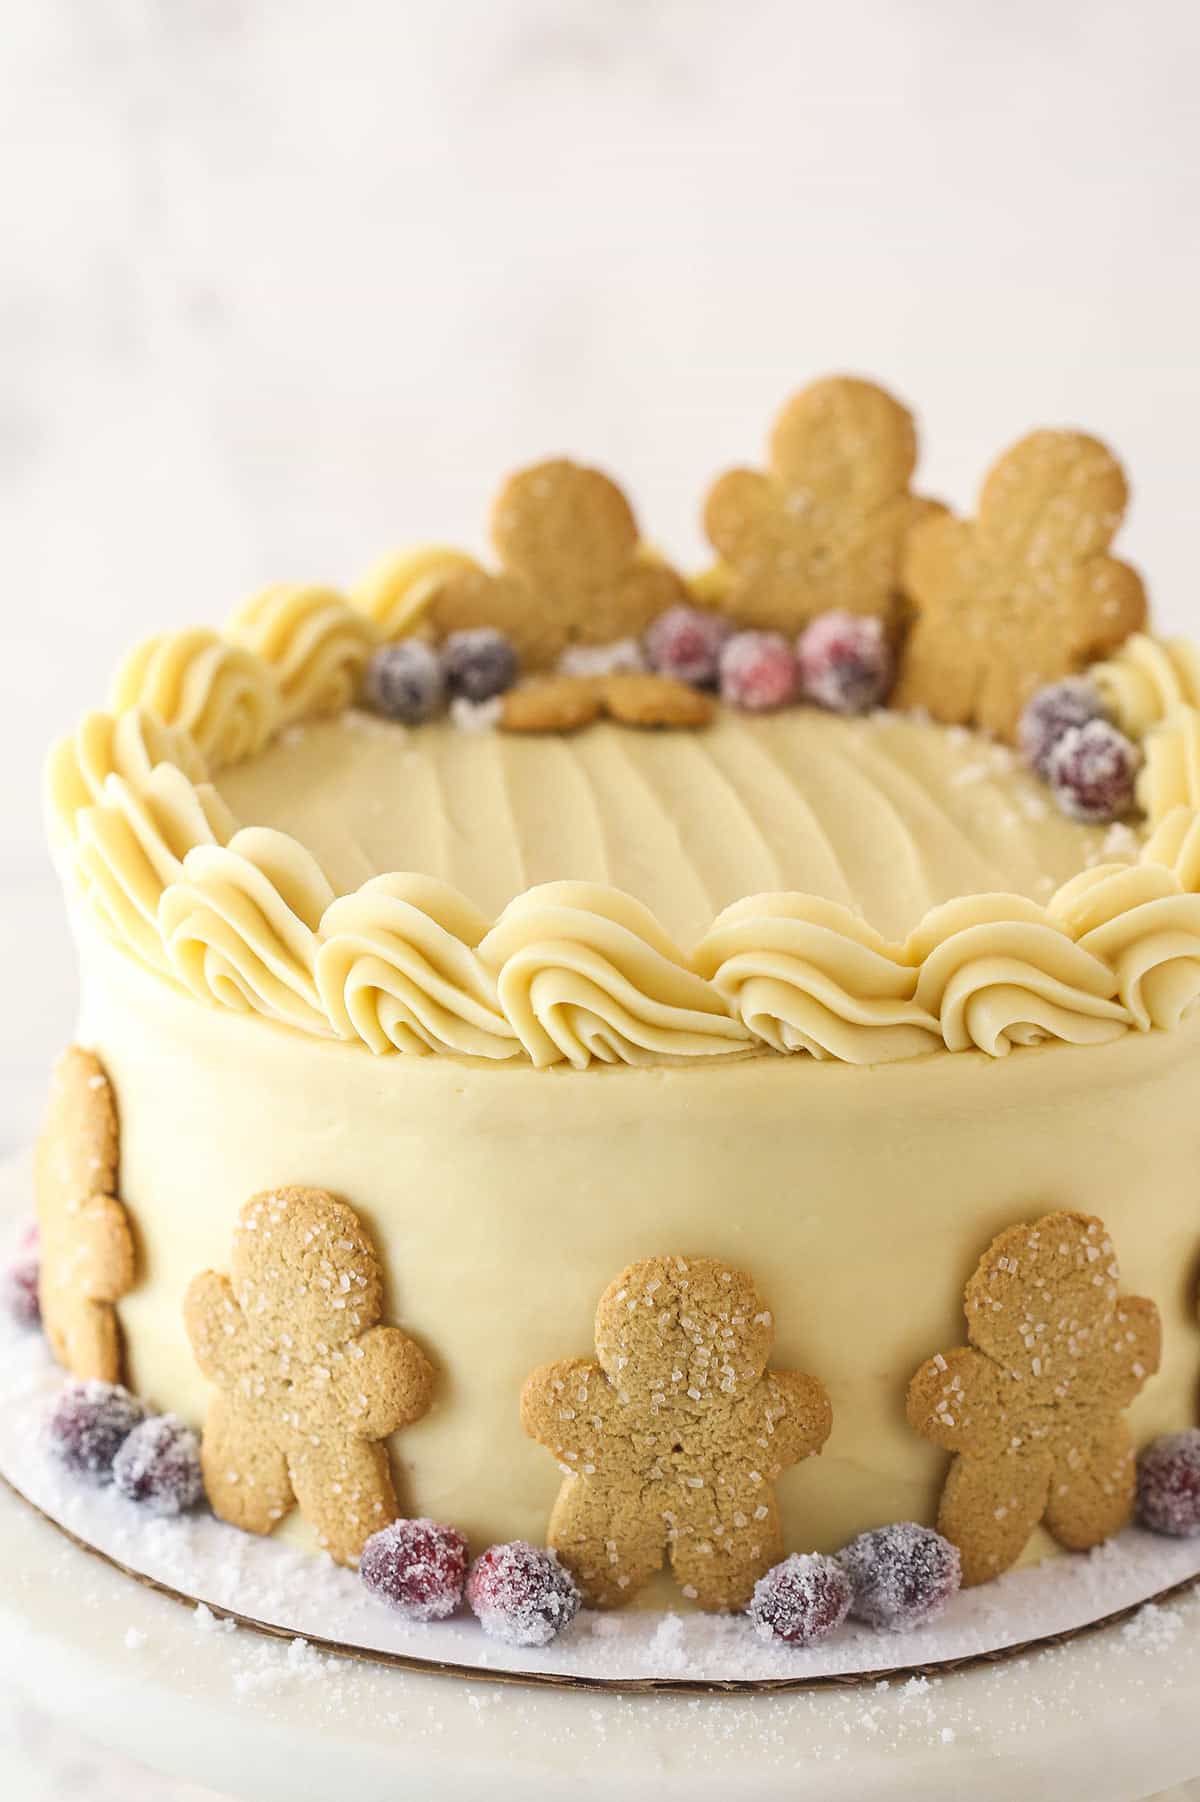 Gingerbread layer cake garnished with gingerbread men and sugared cranberries.